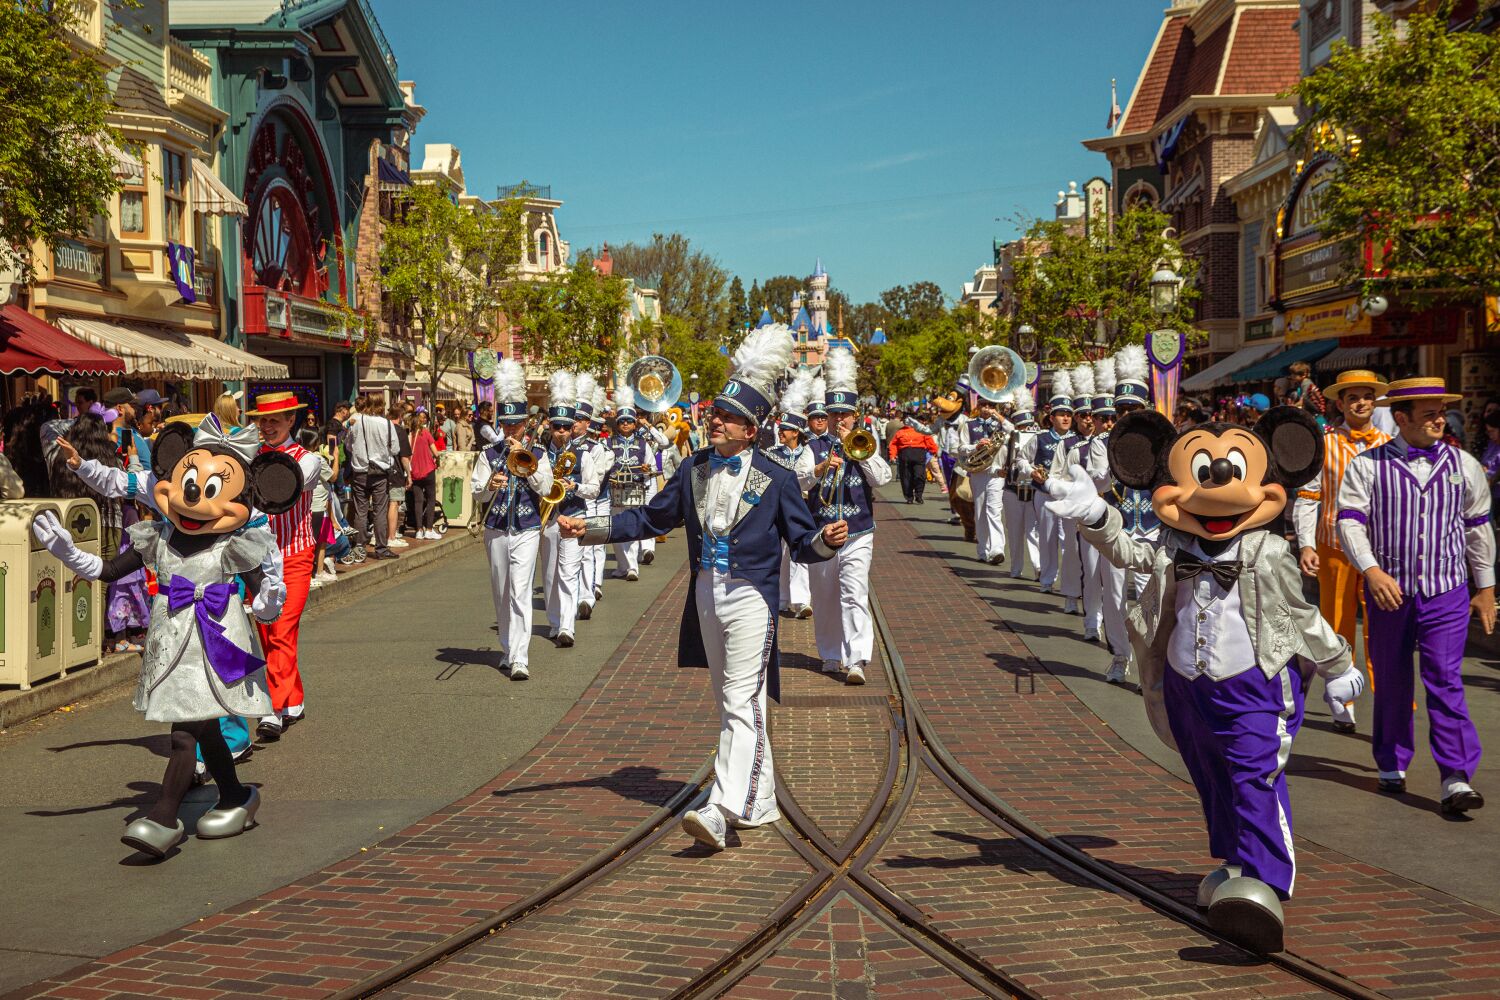 Opinion: Going to Disneyland isn't just a splurge. It's like buying a timeshare